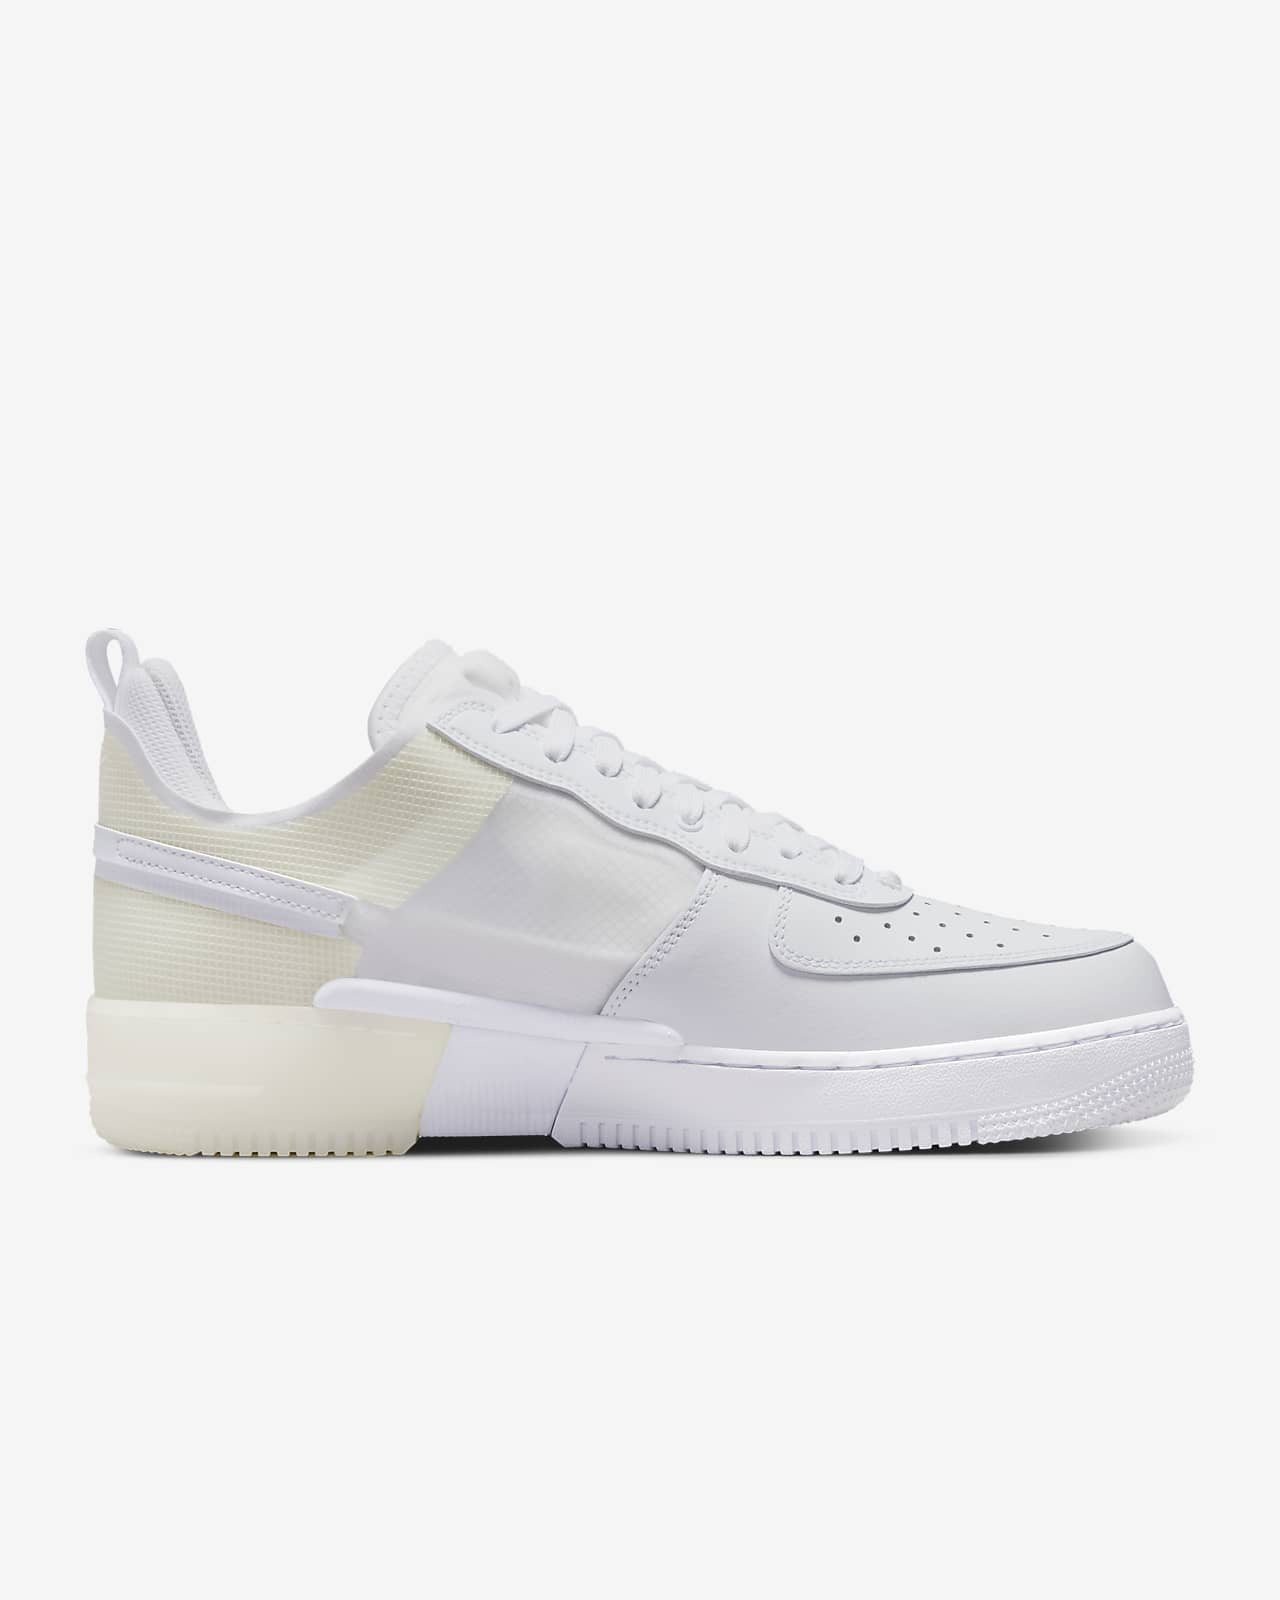 Nike Air Force 1 React Men's Shoes, Size: 8